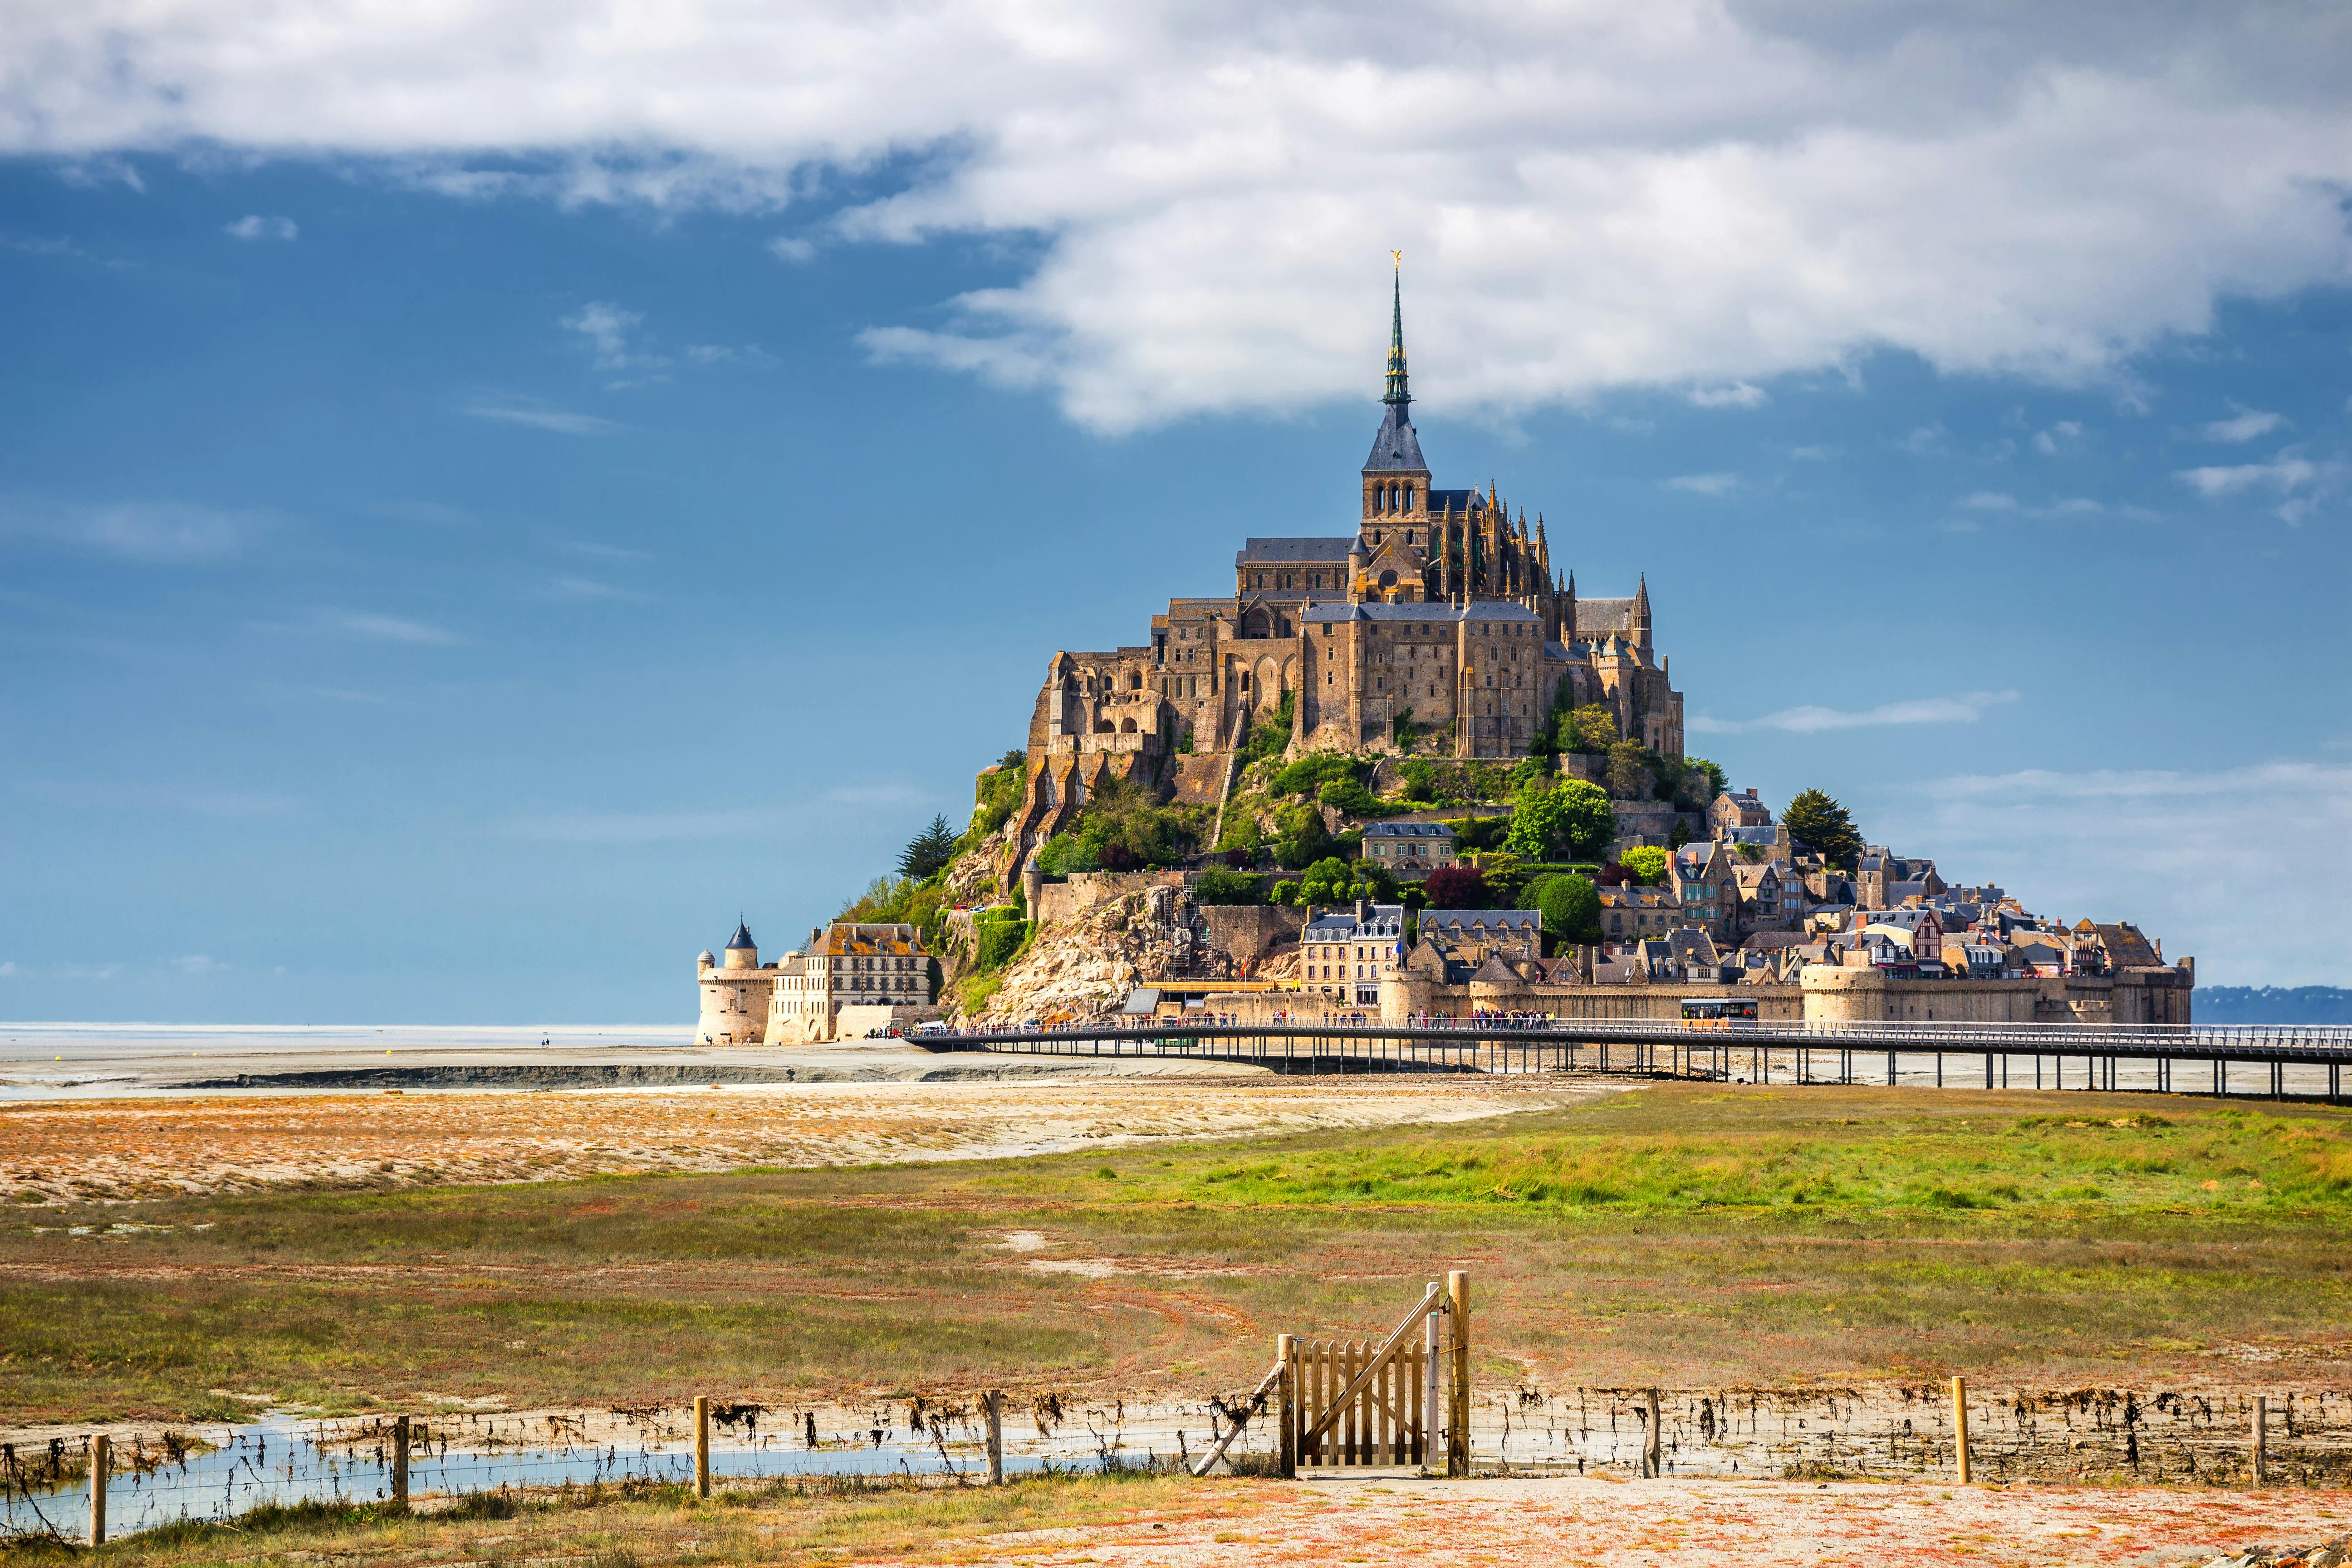 2-day excursion to Mont Saint-Michel, Loire Valley Chateaux and Wine Tasting from Paris